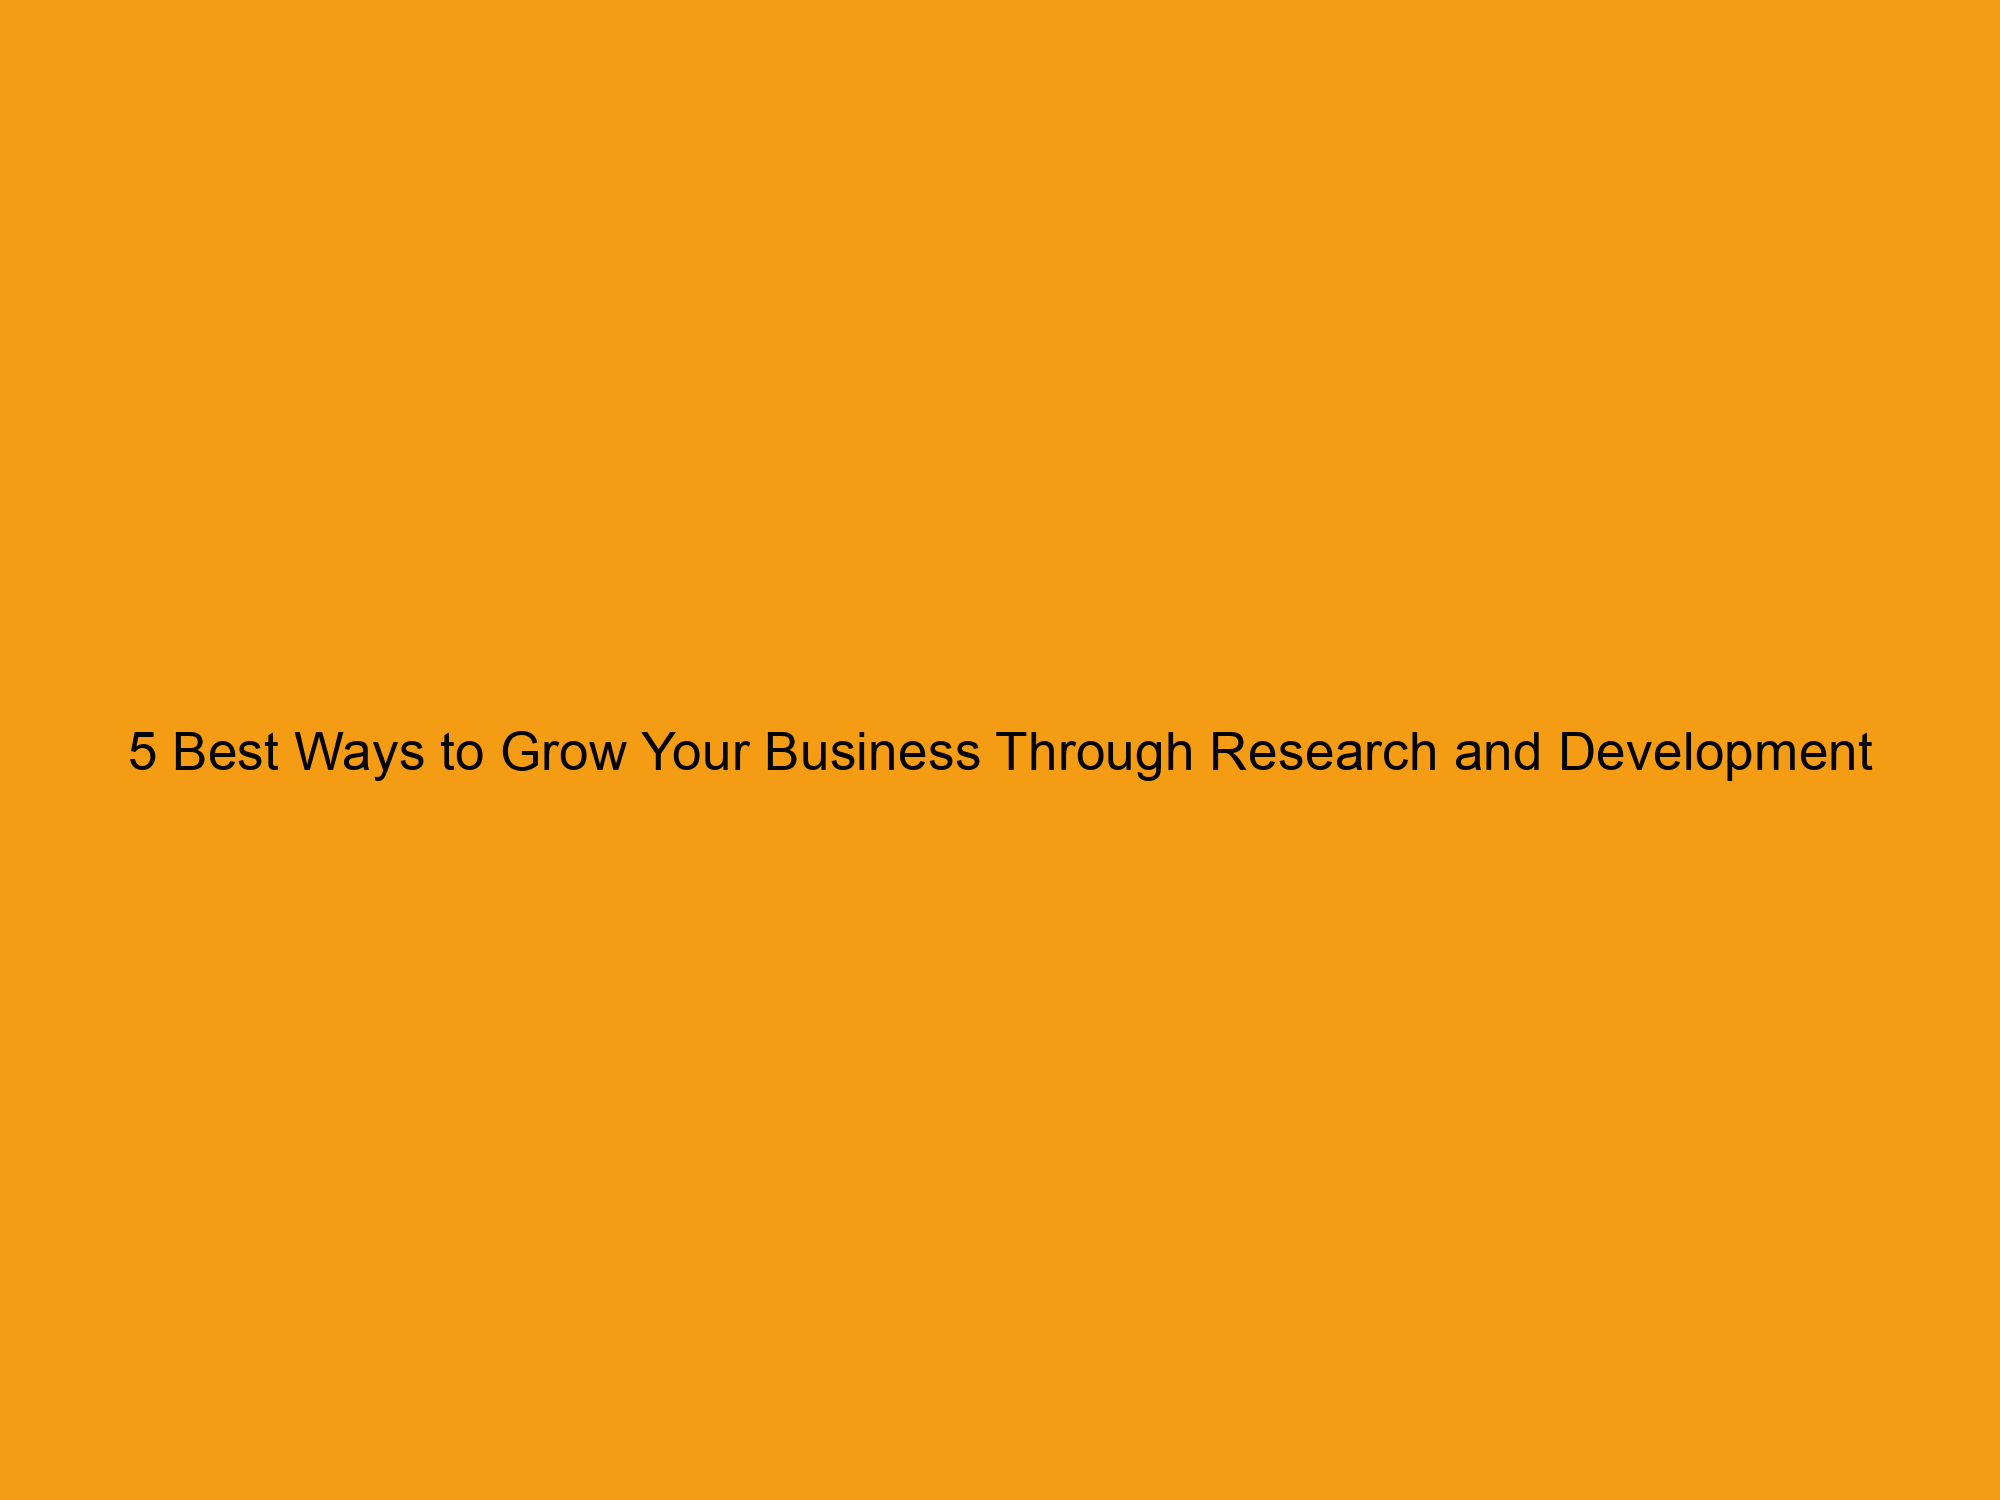 5 Best Ways to Grow Your Business Through Research and Development